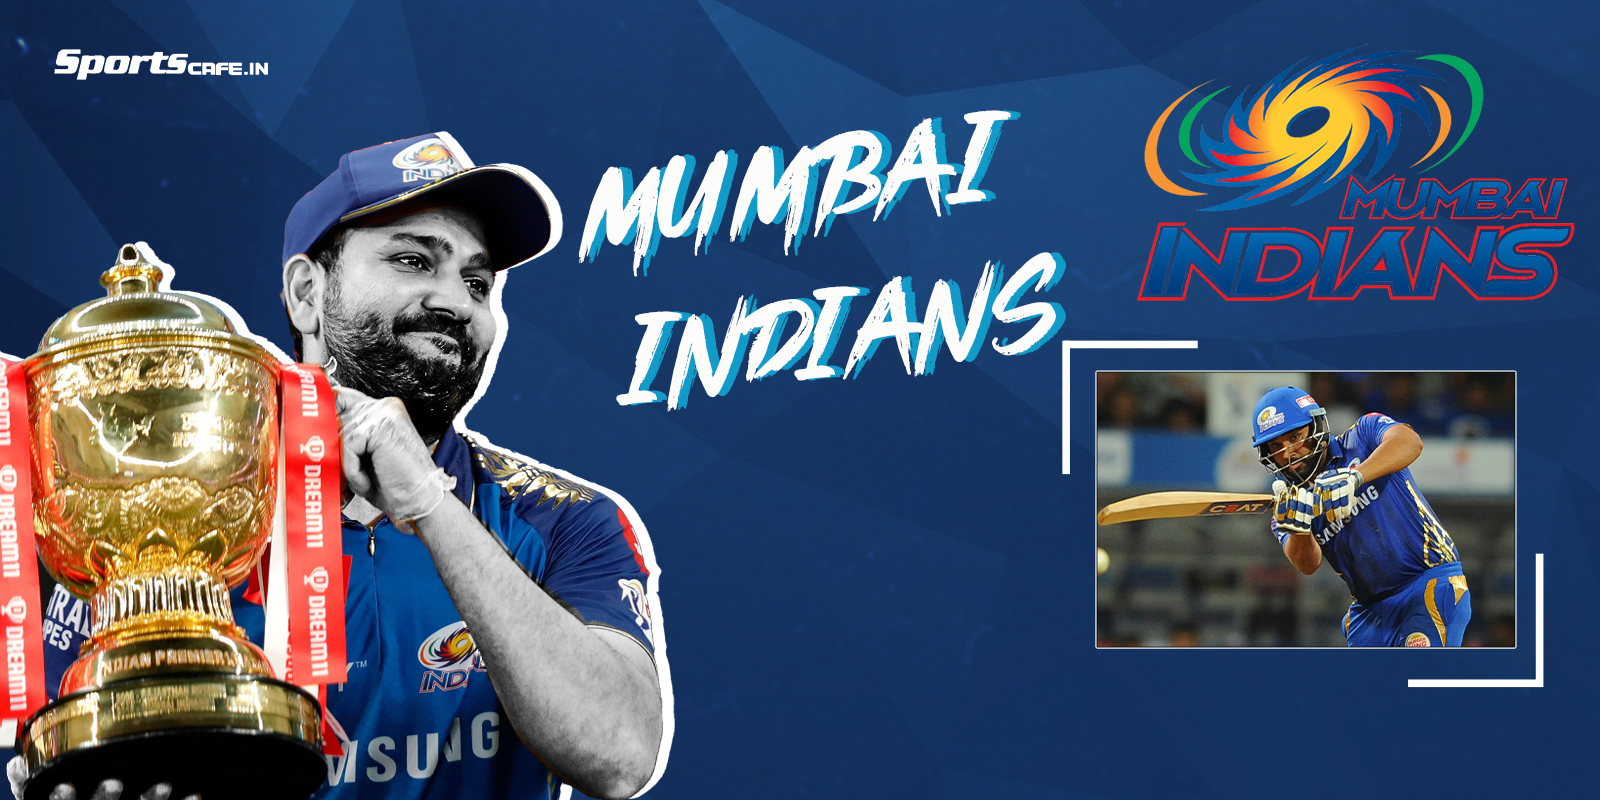 IPL 2022 Live Match Scores, News, Schedule, Point Table, Photos and Videos